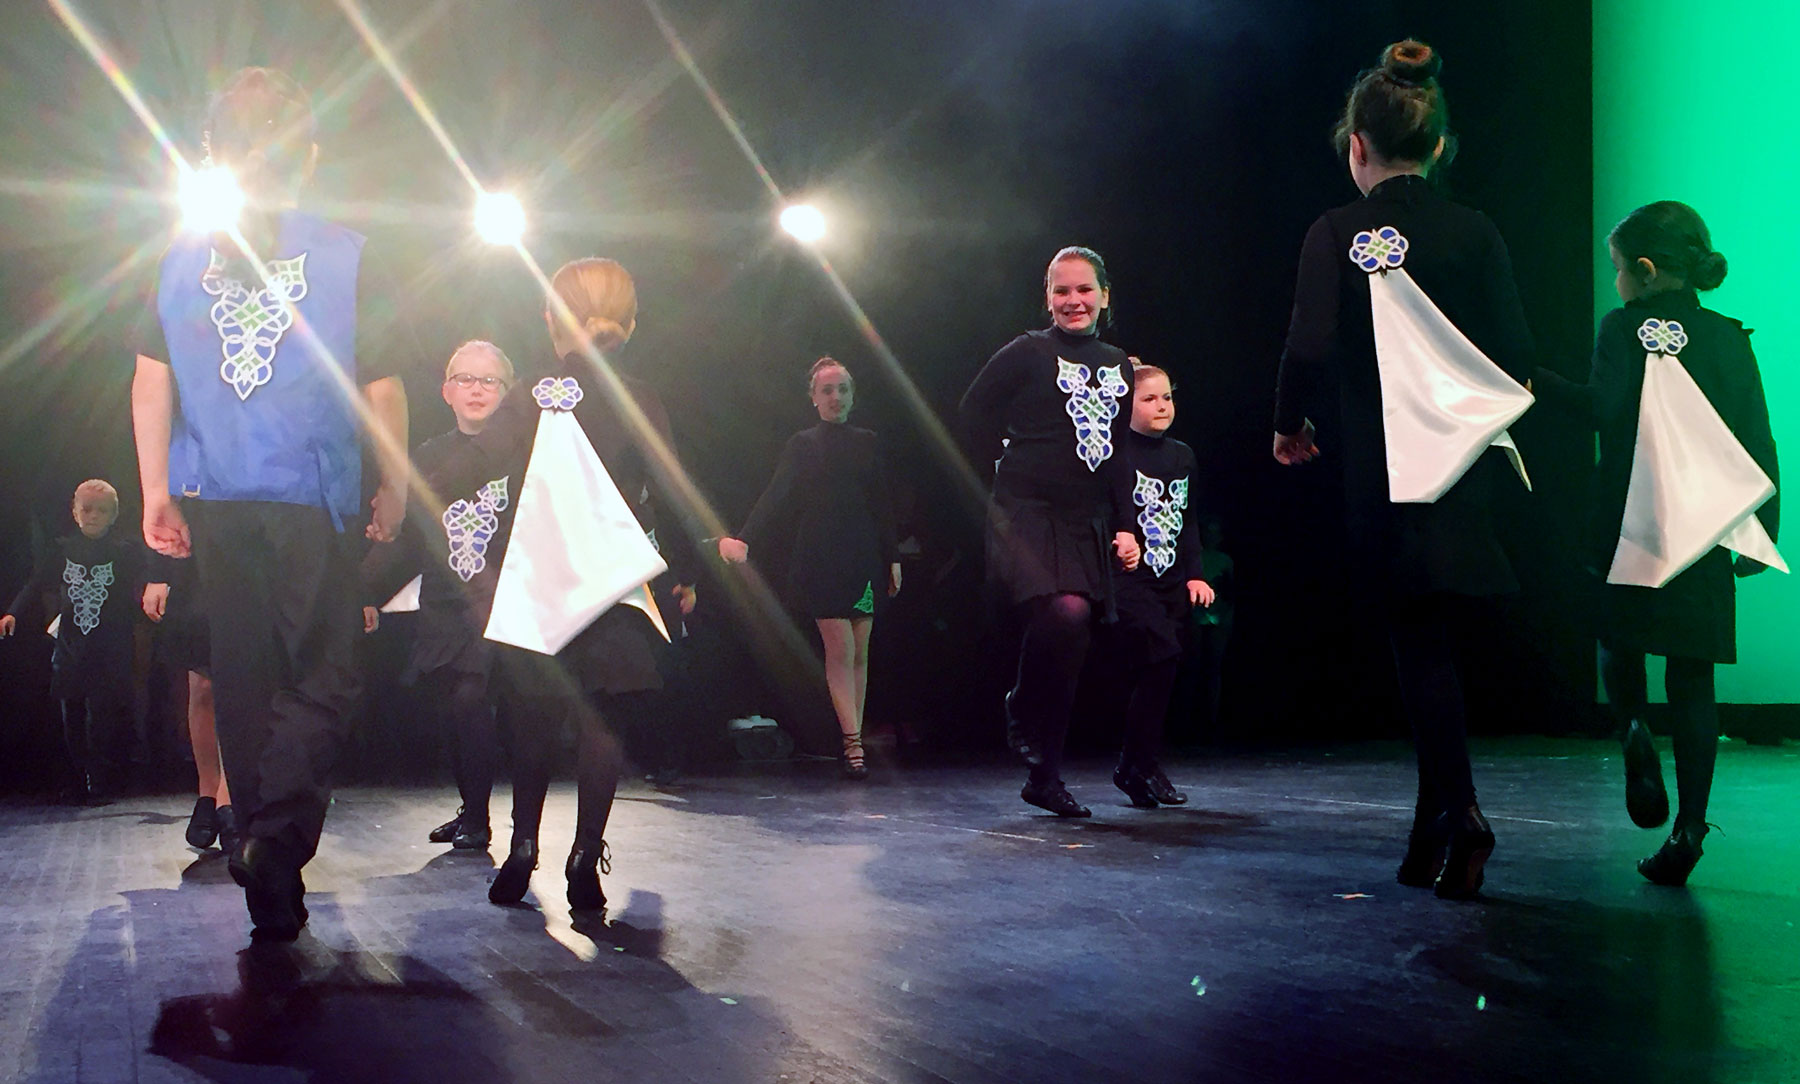 A year of firsts for our community-based Lexington Irish dance school